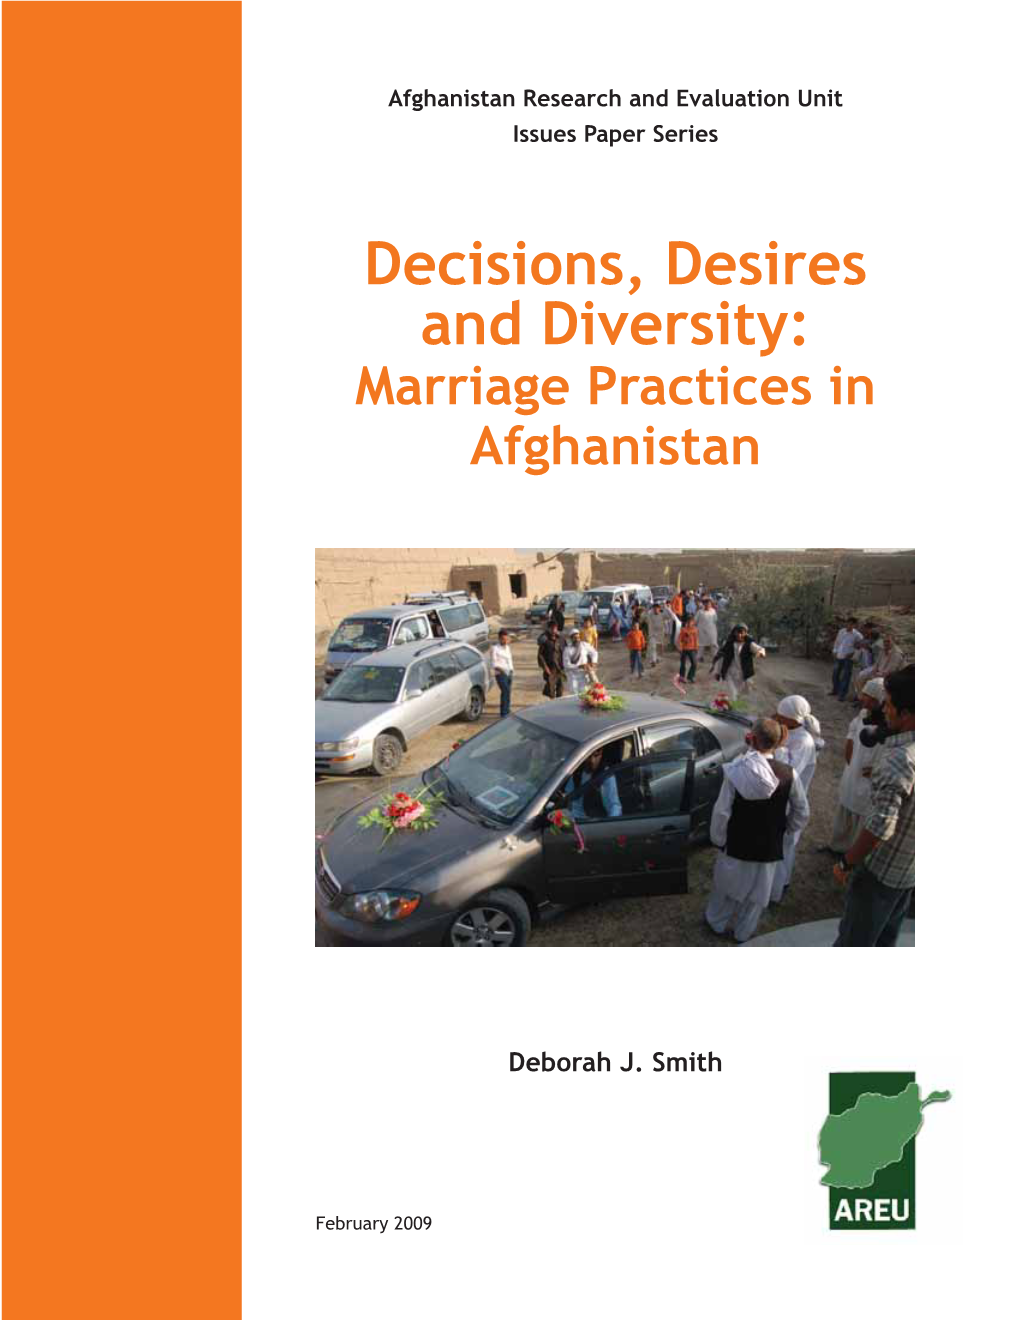 Decisions, Desires and Diversity: Marriage Practices in Afghanistan